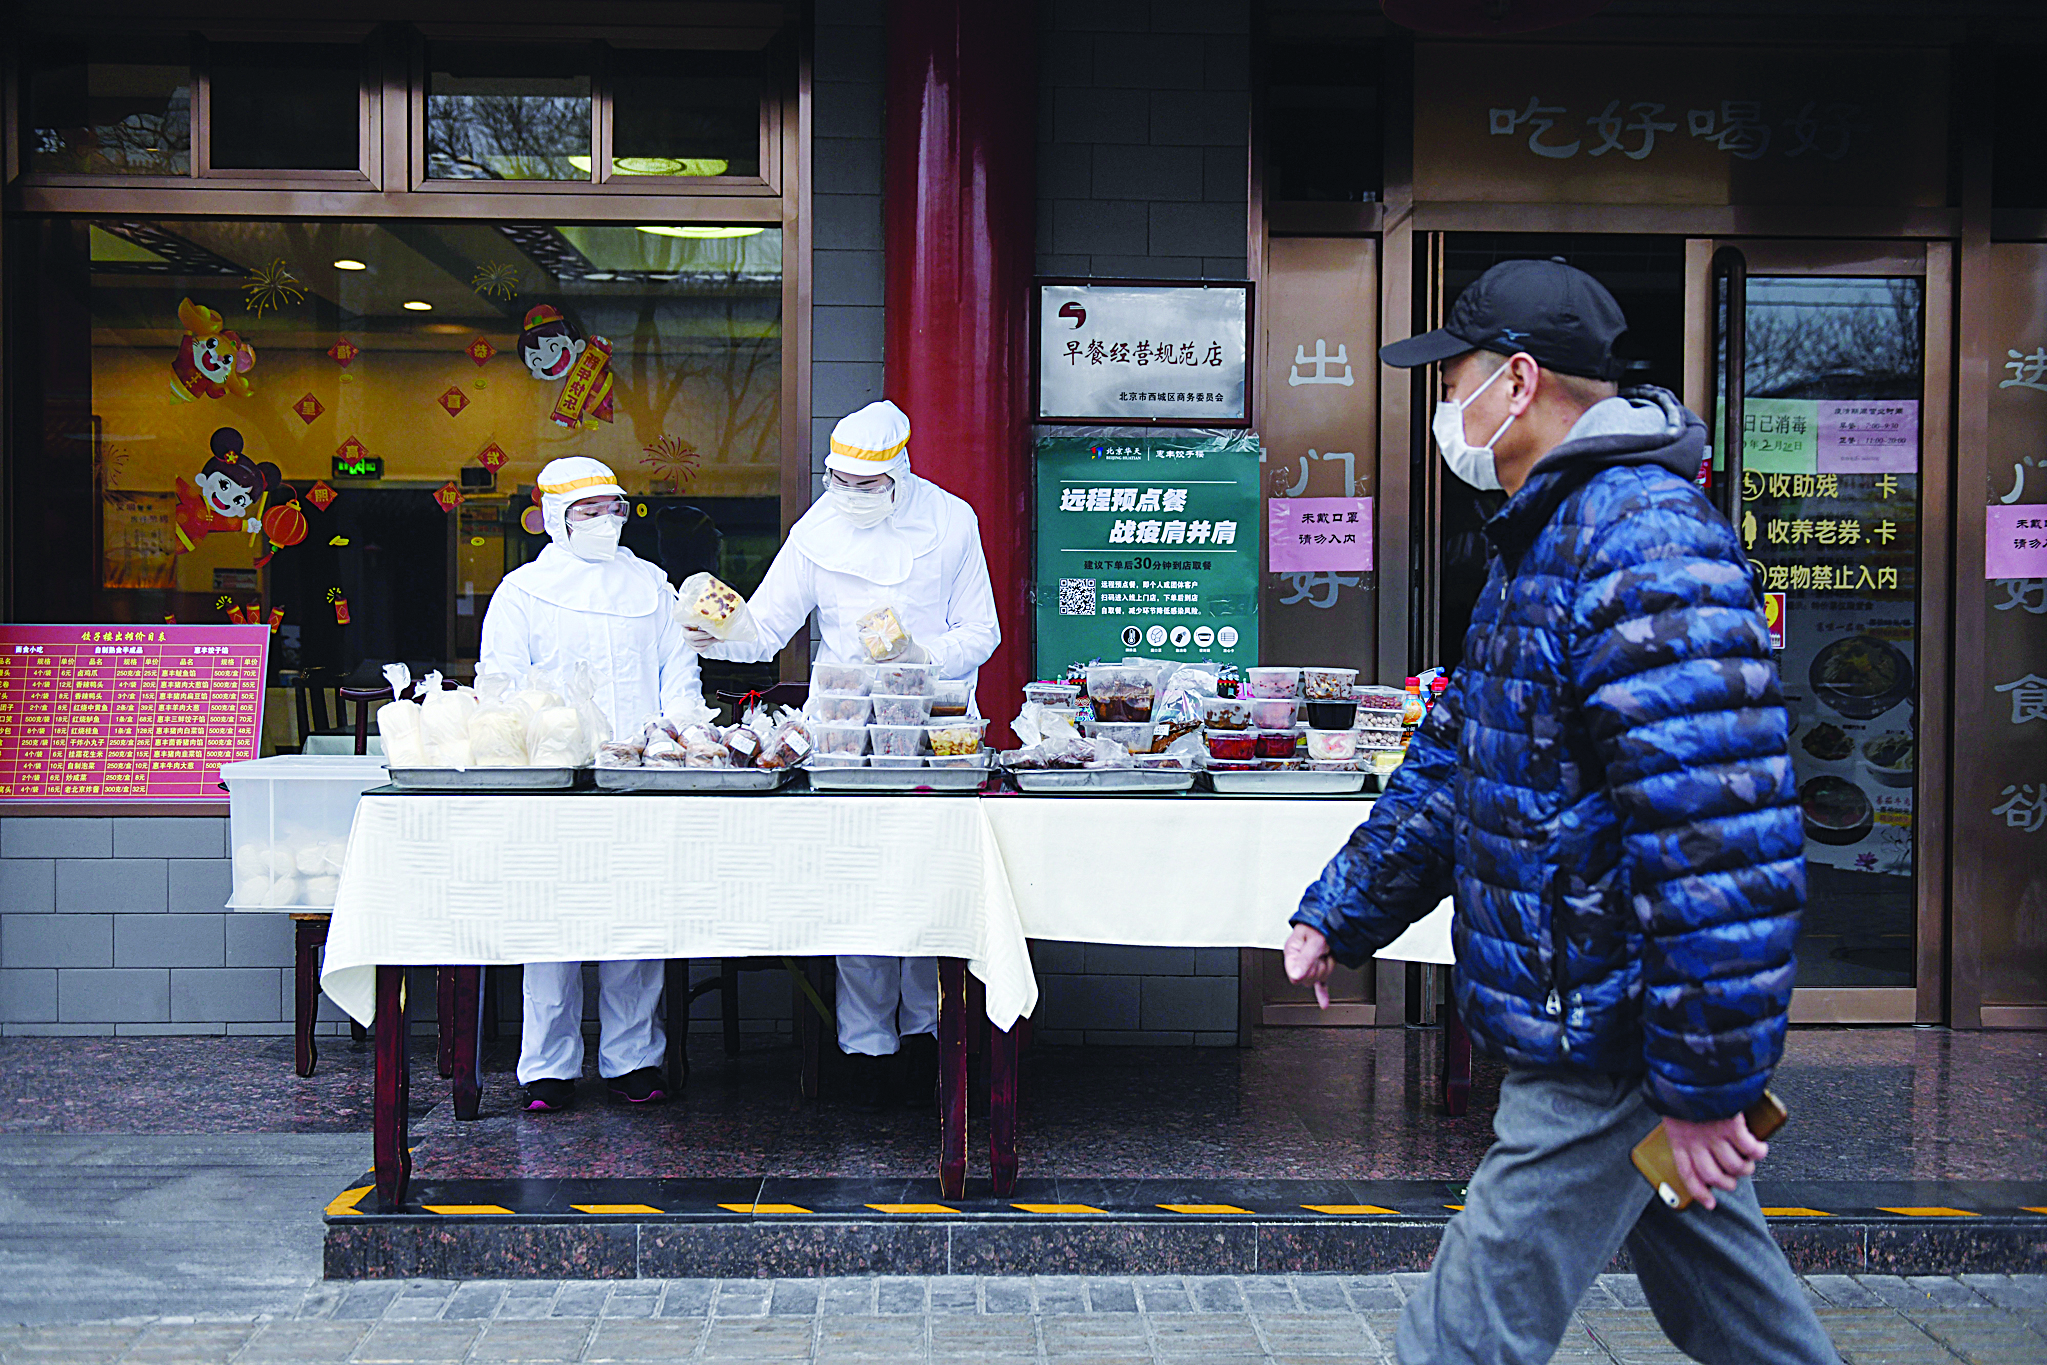 Restaurant workers wear protective clothing as they prepare food to sell on the street outside their restaurant in Beijing on February 20, 2020. - China on February 20 touted a big drop in new virus infections as proof its epidemic control efforts are working, but the toll grew abroad with deaths in Japan and South Korea. (Photo by Greg Baker / AFP)